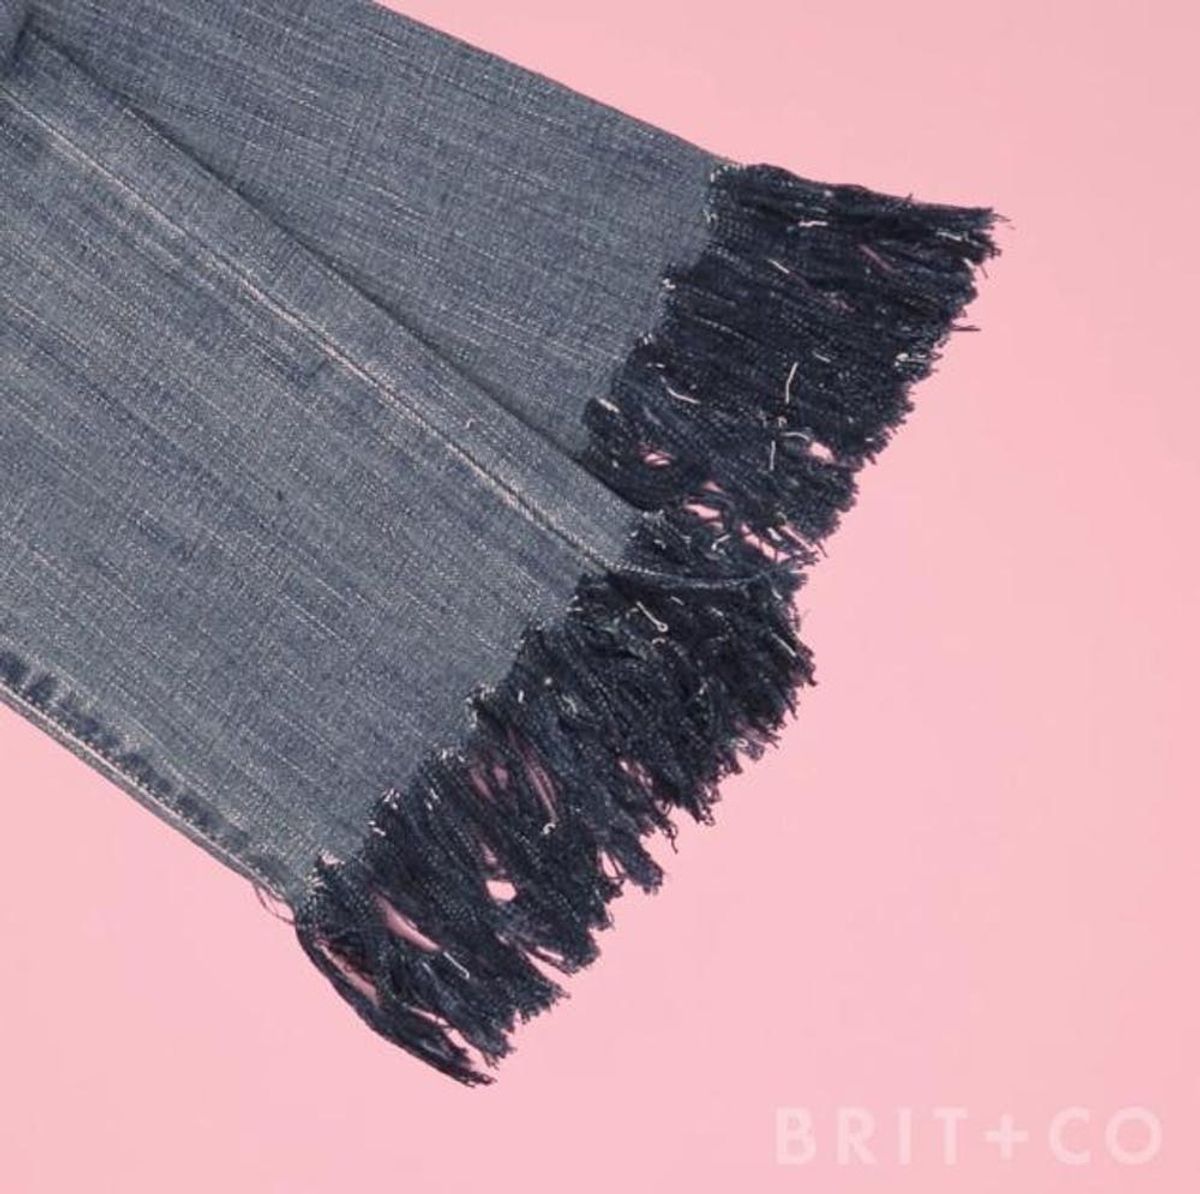 How To DIY Fringed Jeans